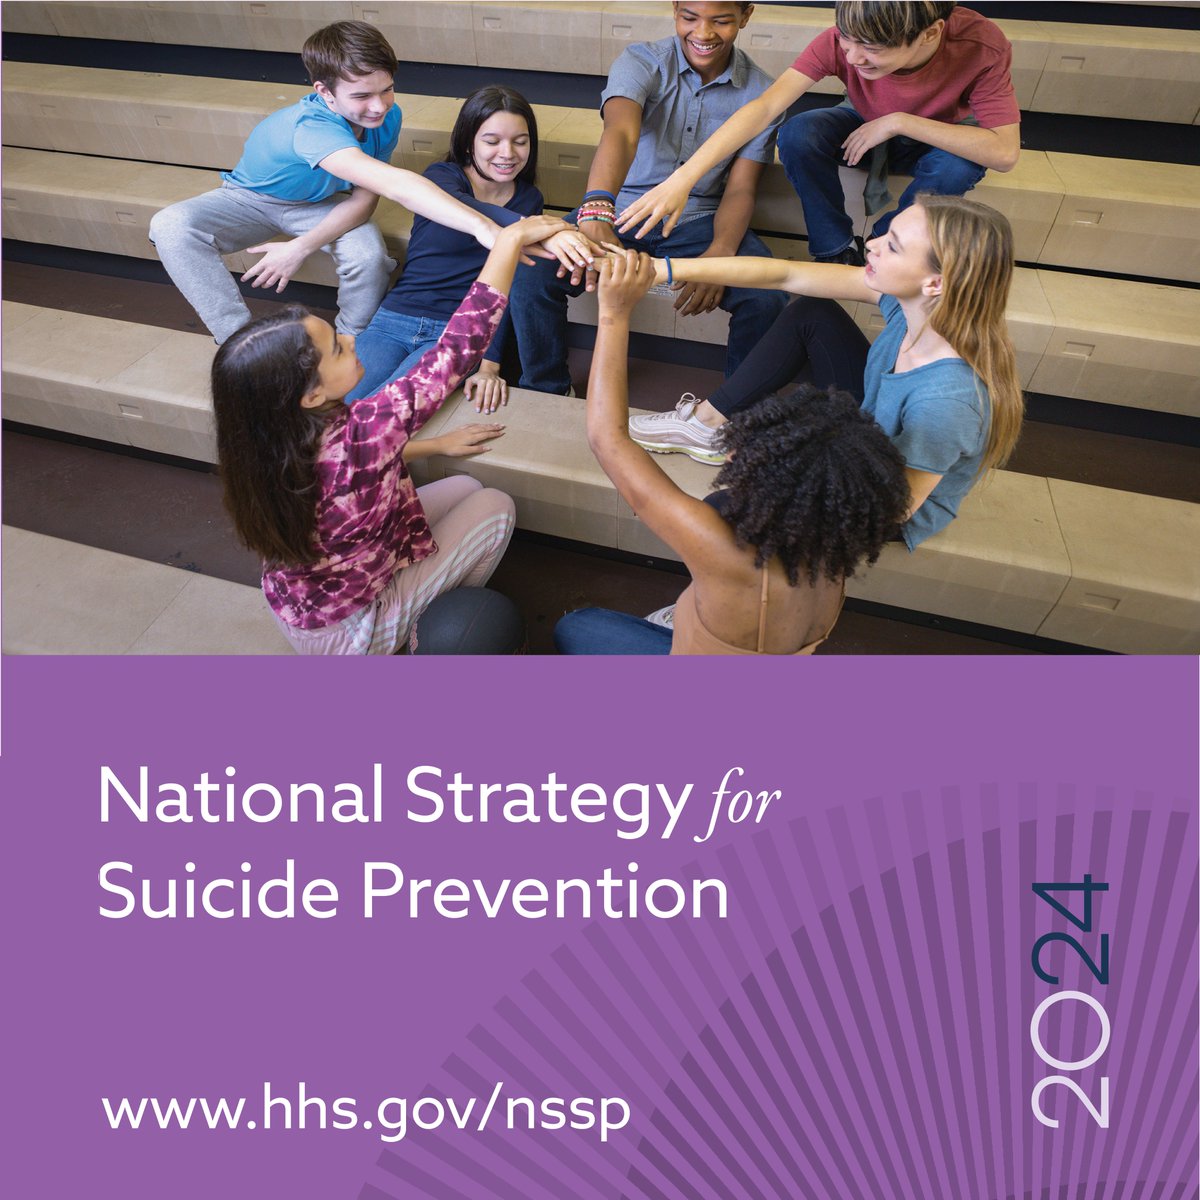 Just released: The 2024 National Strategy for Suicide Prevention from @HHSgov. It is a bold new 10-year whole-of-society approach that provides concrete recommendations for addressing gaps in the suicide prevention field. hhs.gov/nssp @Action_Alliance